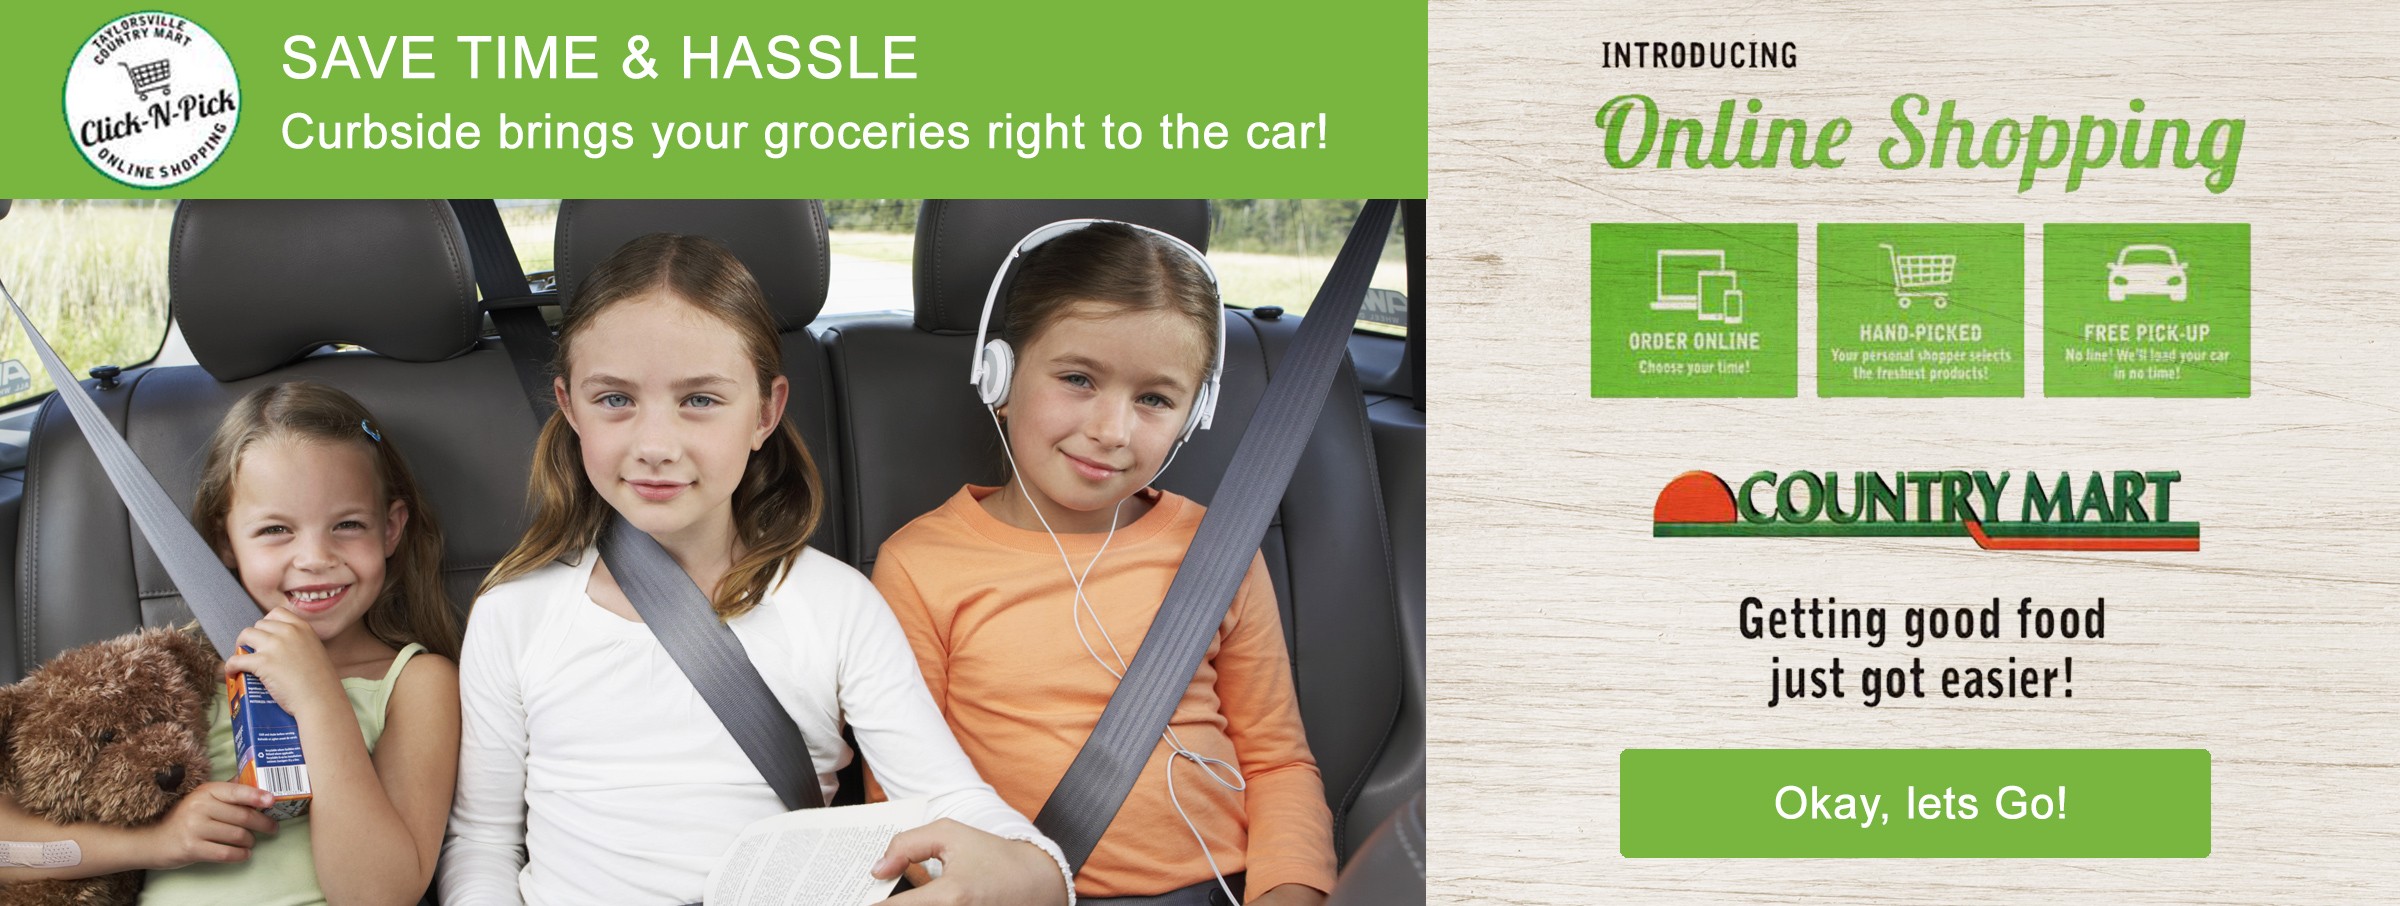 Introducing Online Shopping: Curbside brings your groceries right to the car!